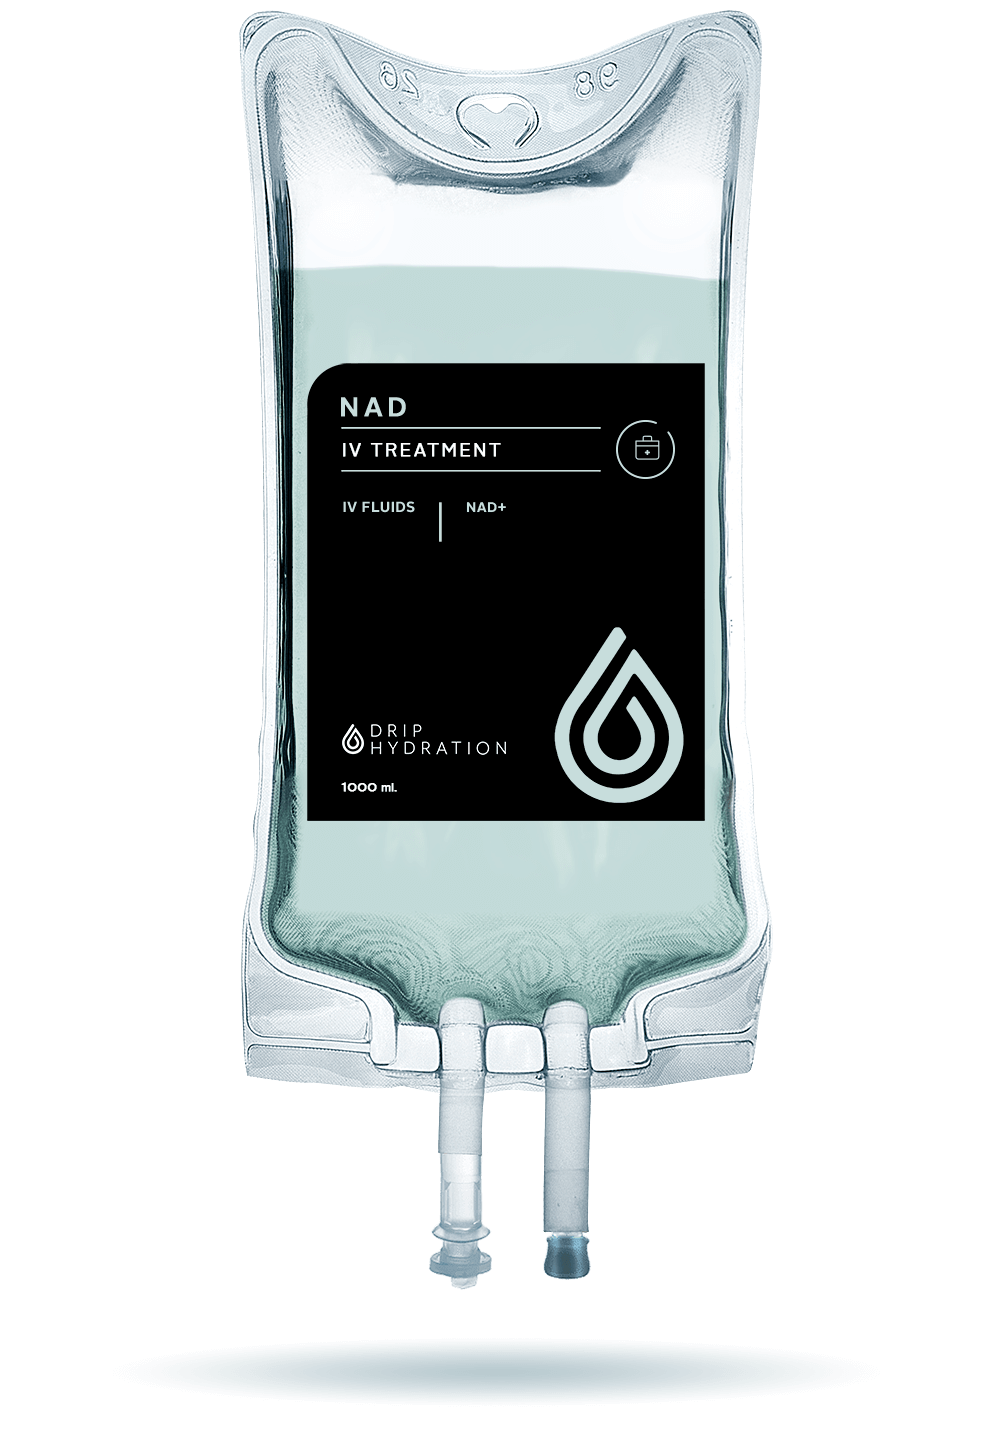 infusion bag named NAD iv linking toward the service page